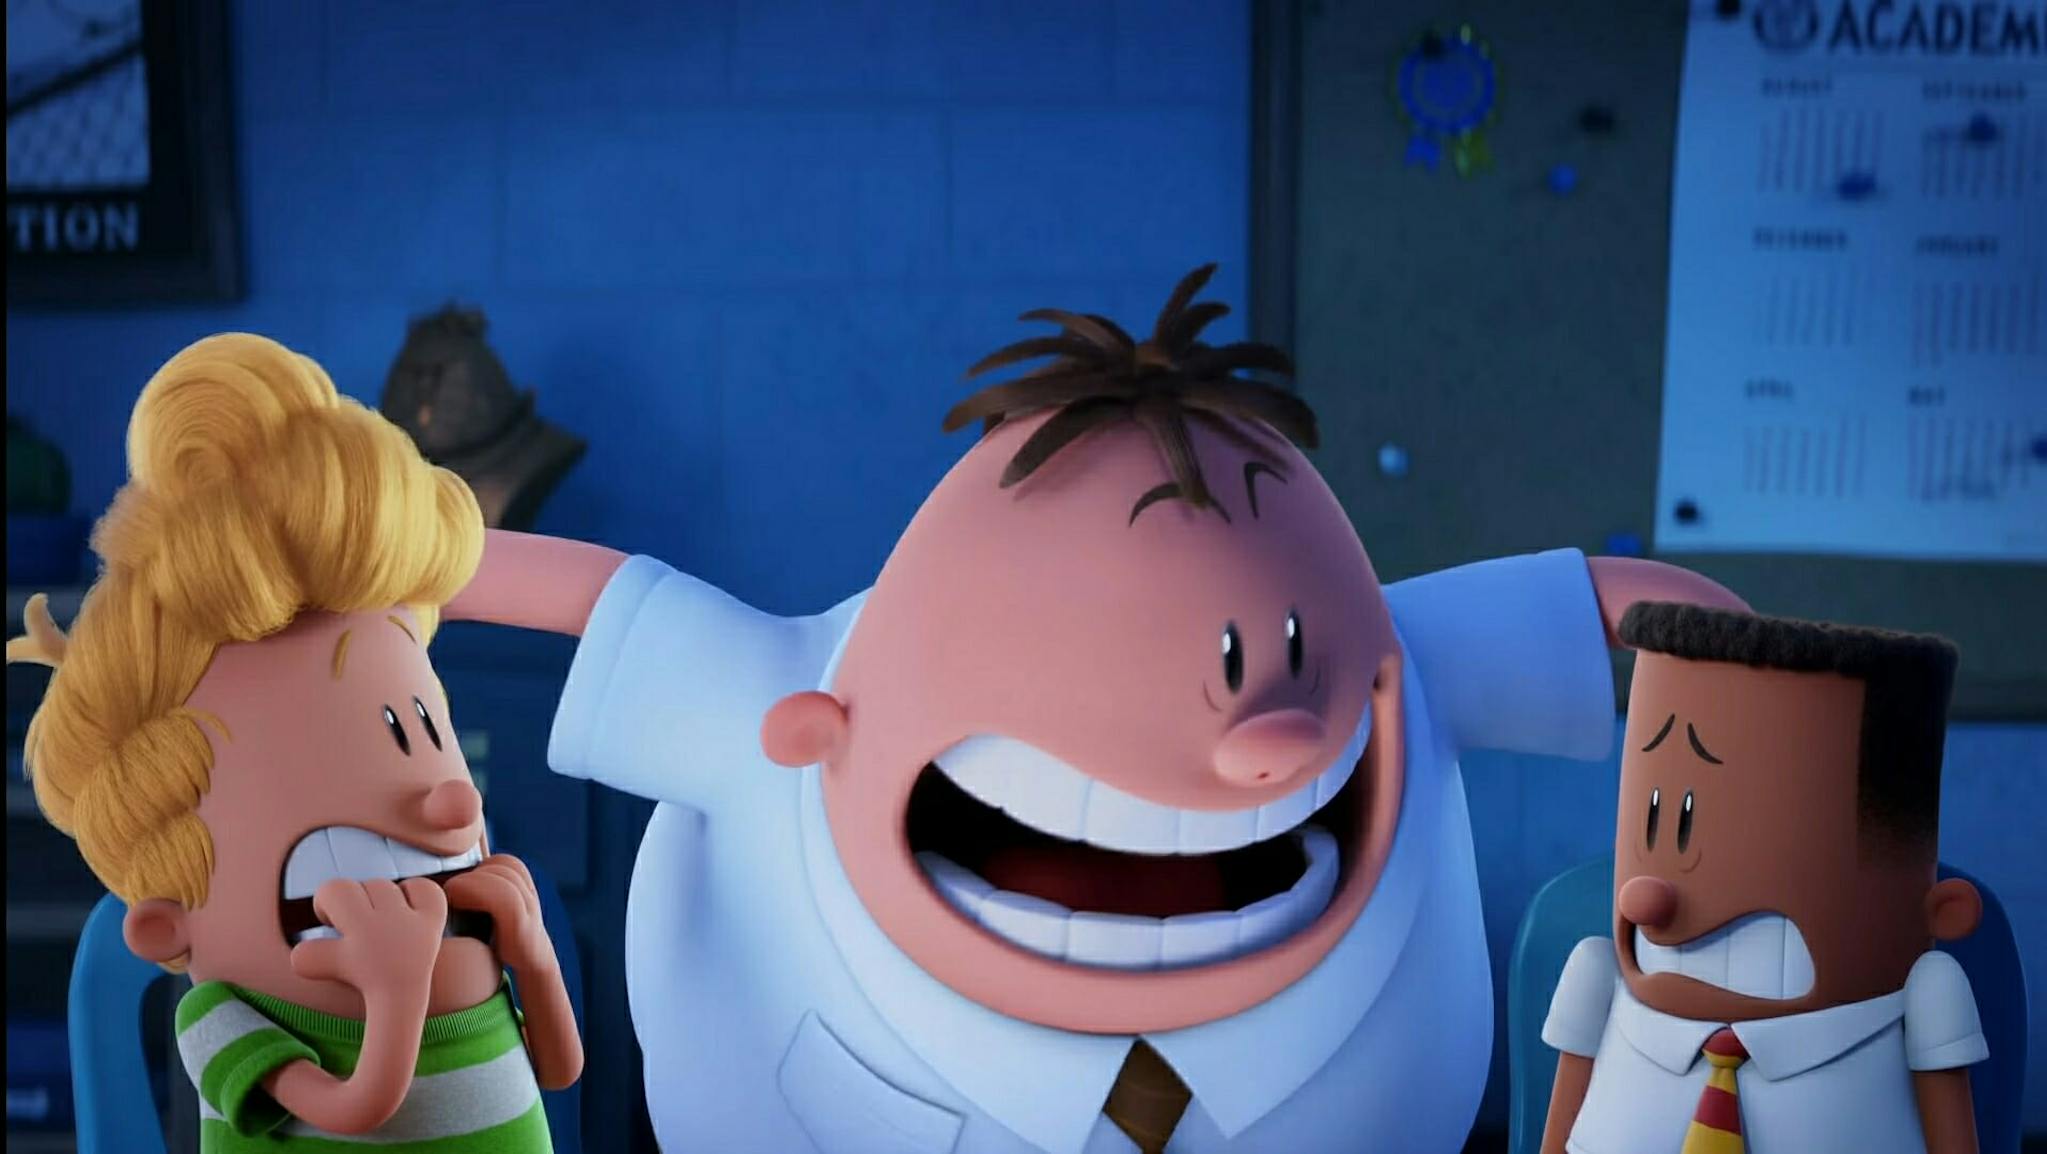 The 28 Best Kids Movies on Netflix the Whole Family Can Enjoy